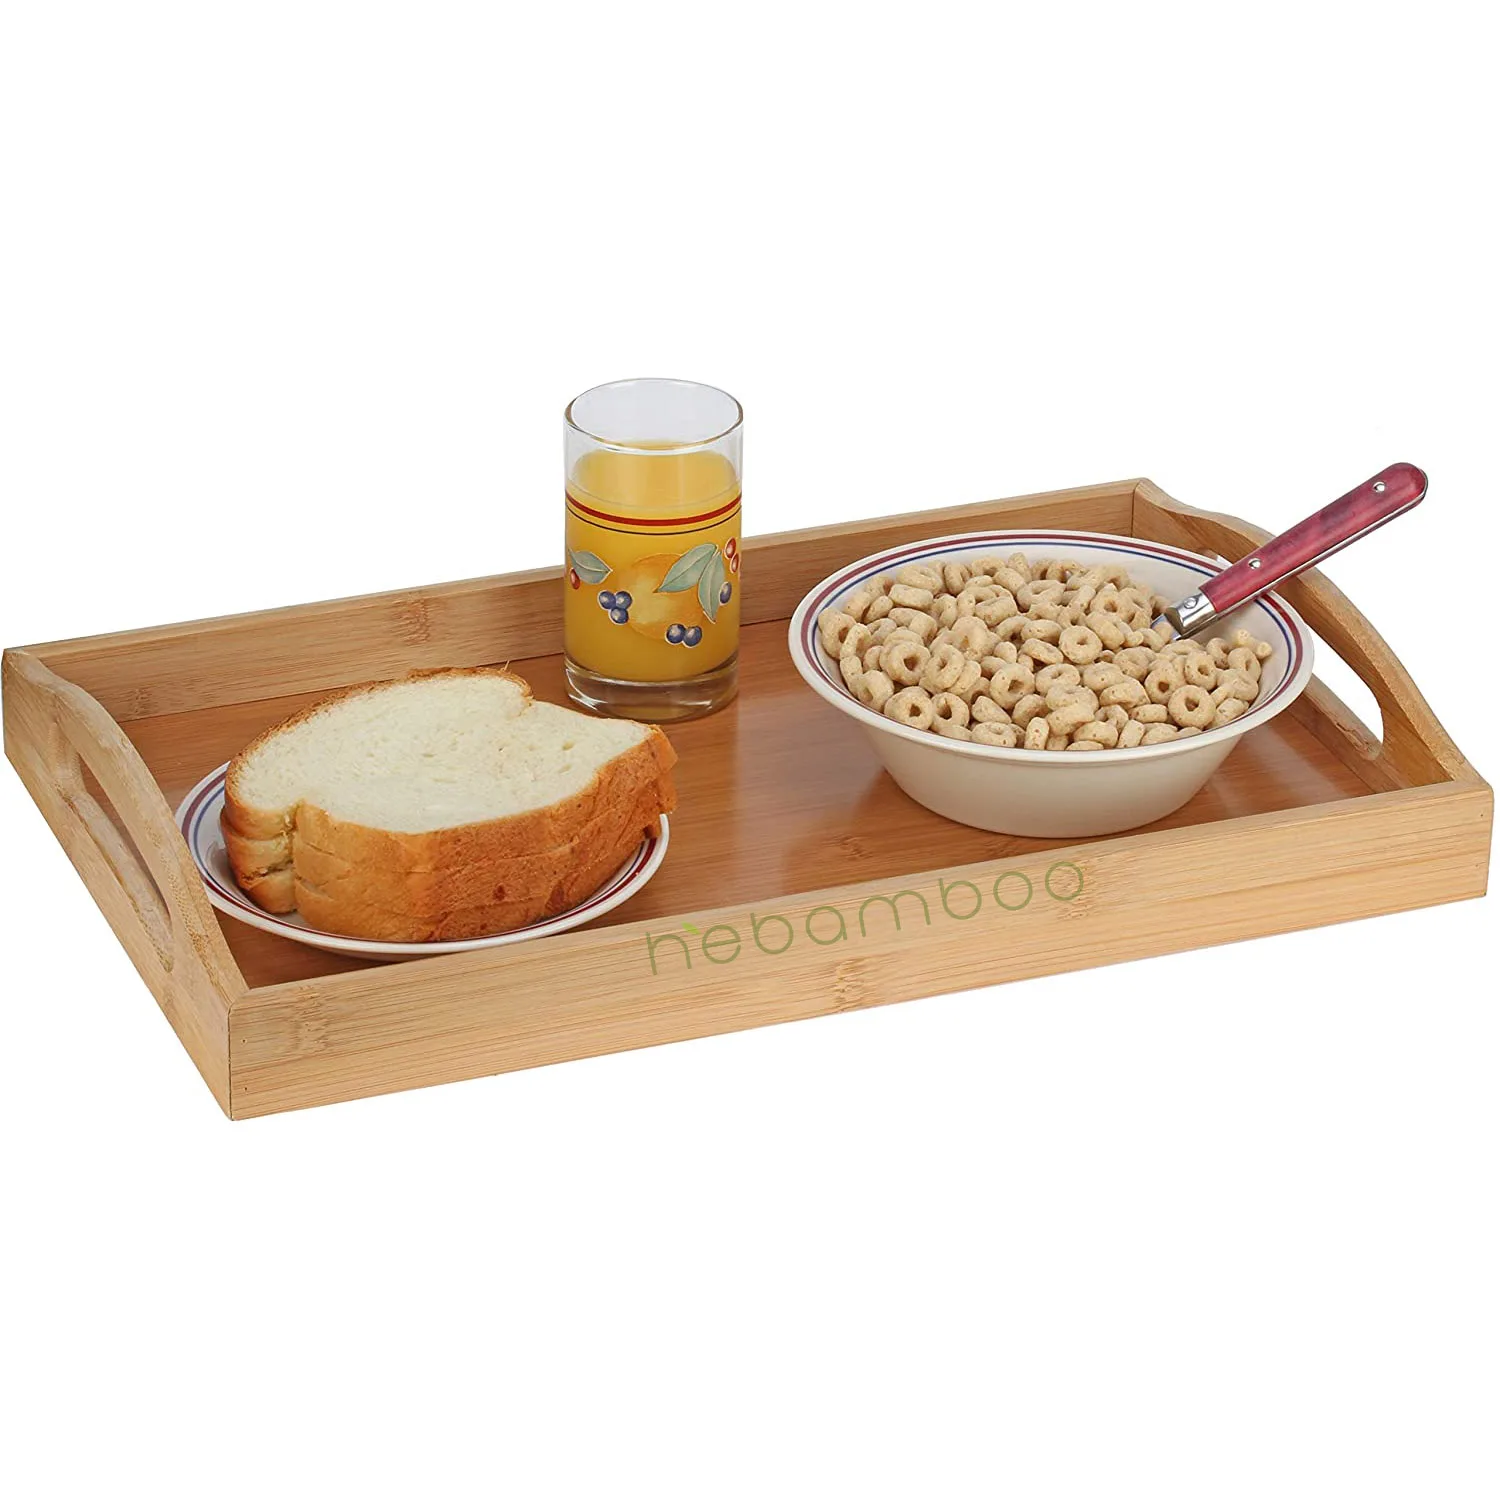 Factory Large Bamboo Food Serving Tray with Handles for Dinner Breakfast